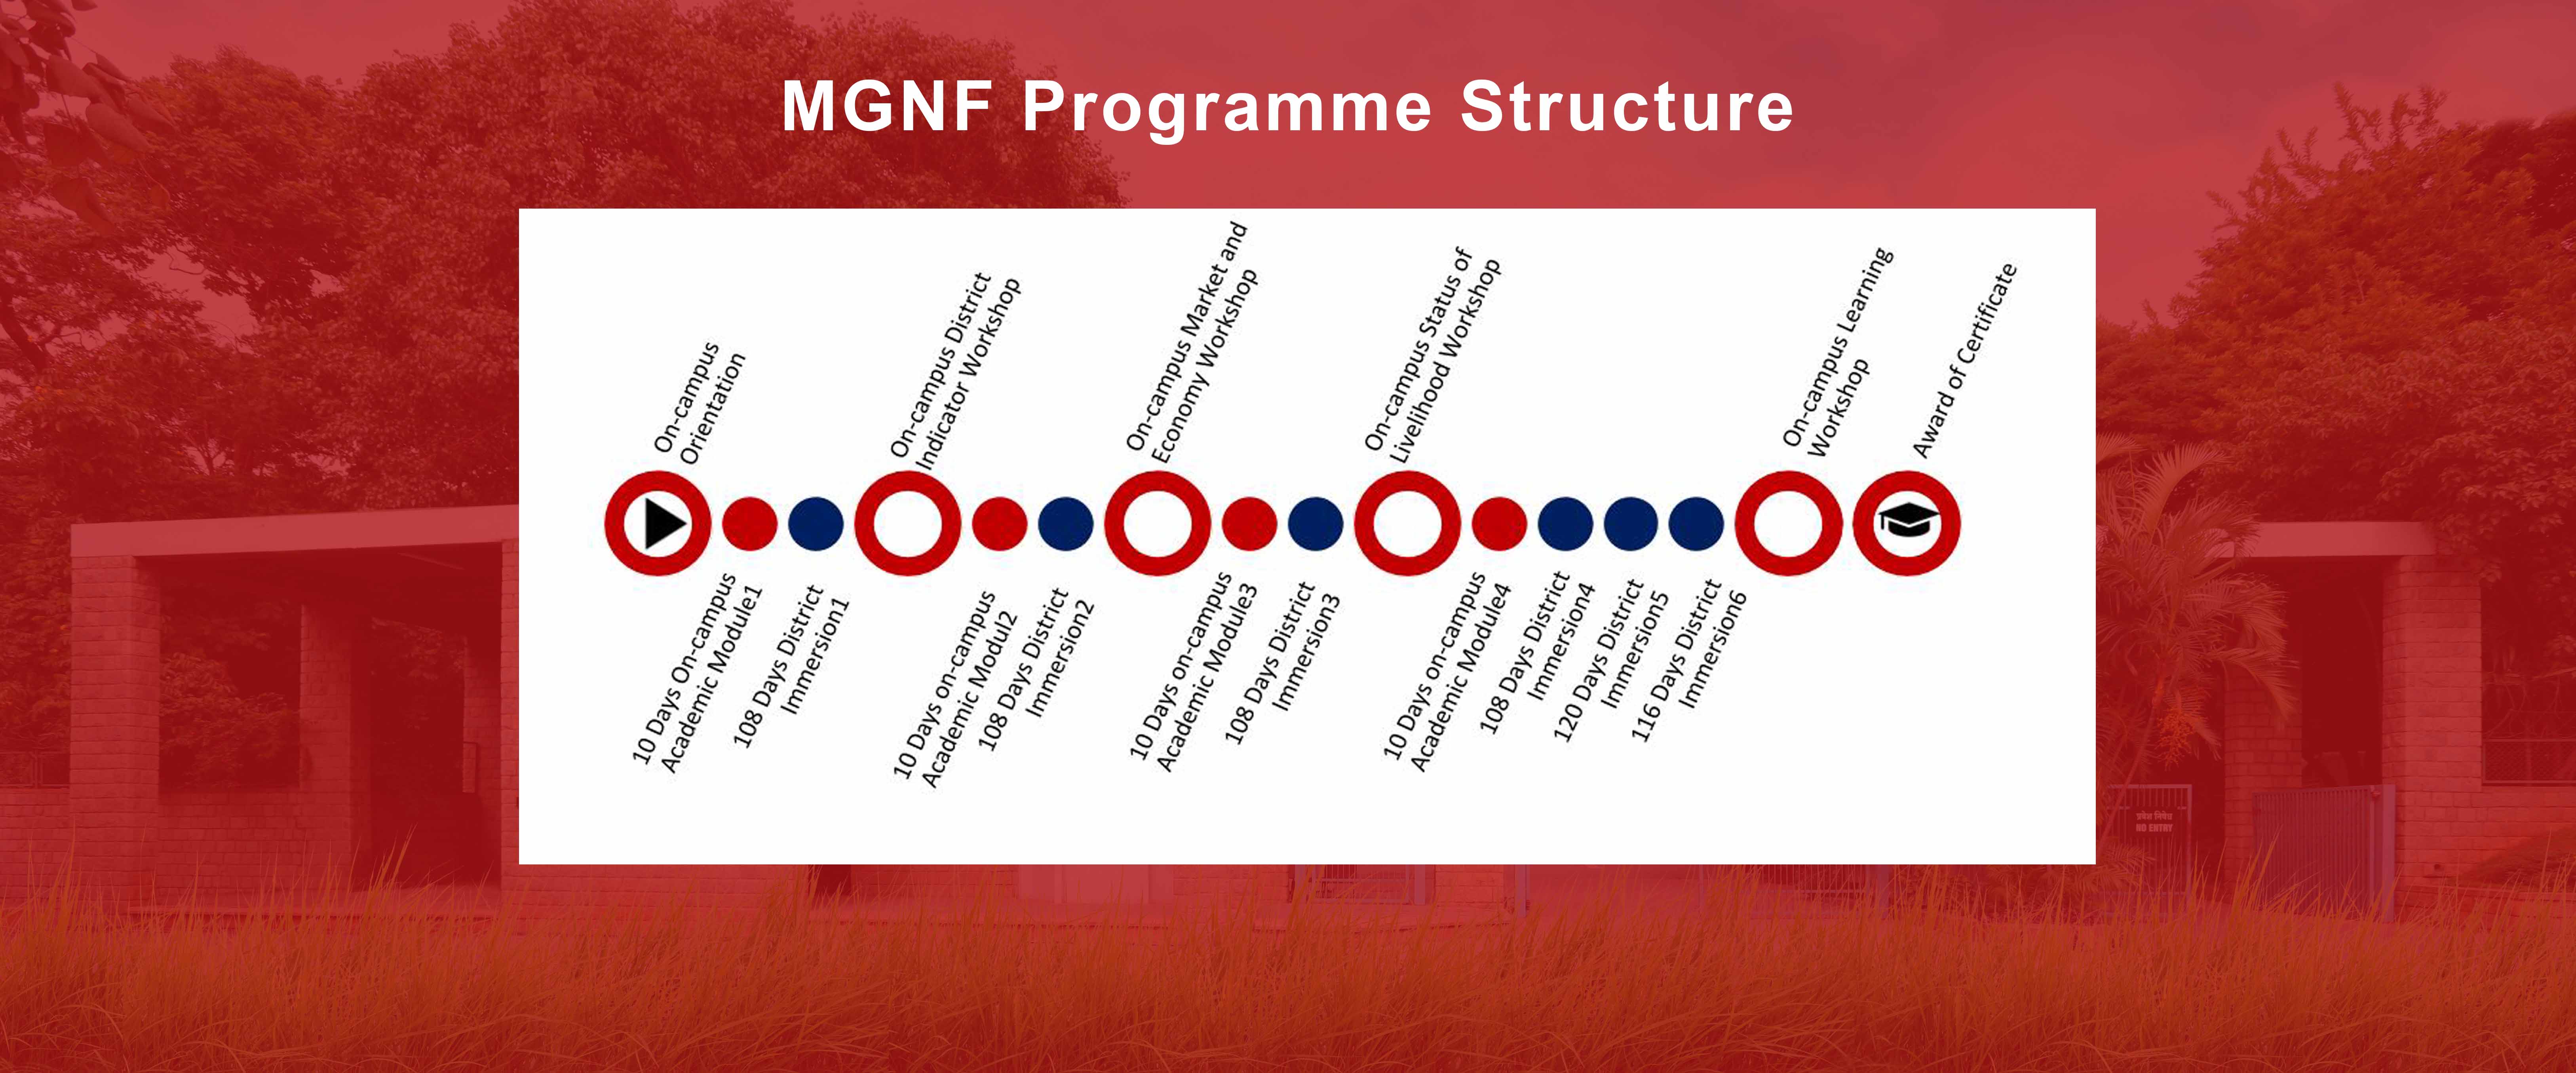 pROGRAMME STRUCTURE